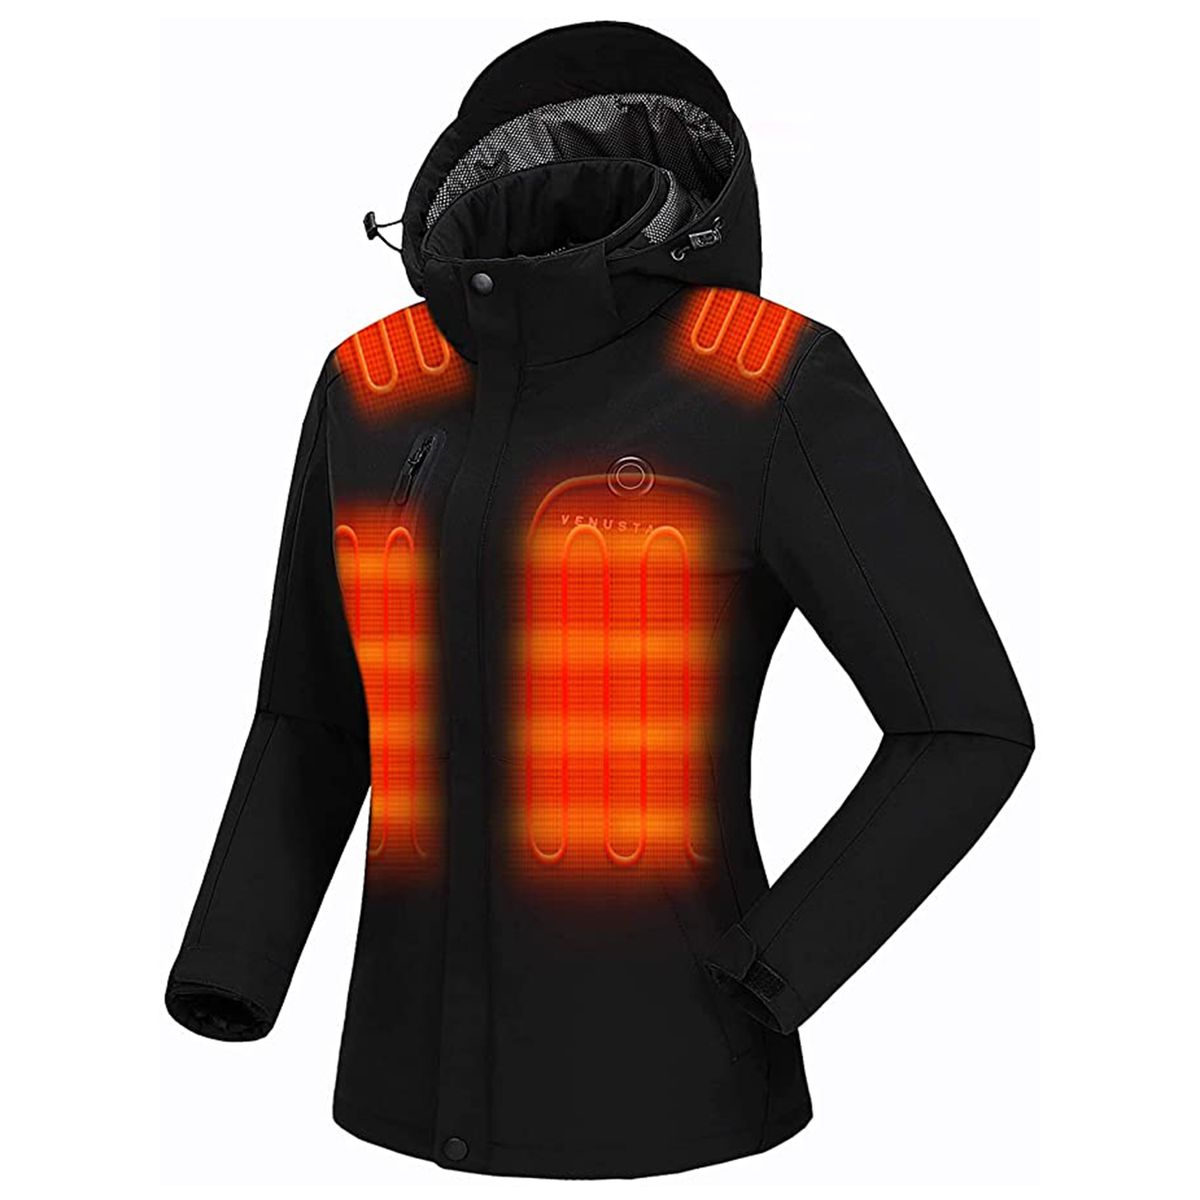 Venustas Women's Heated Jacket with Battery Pack